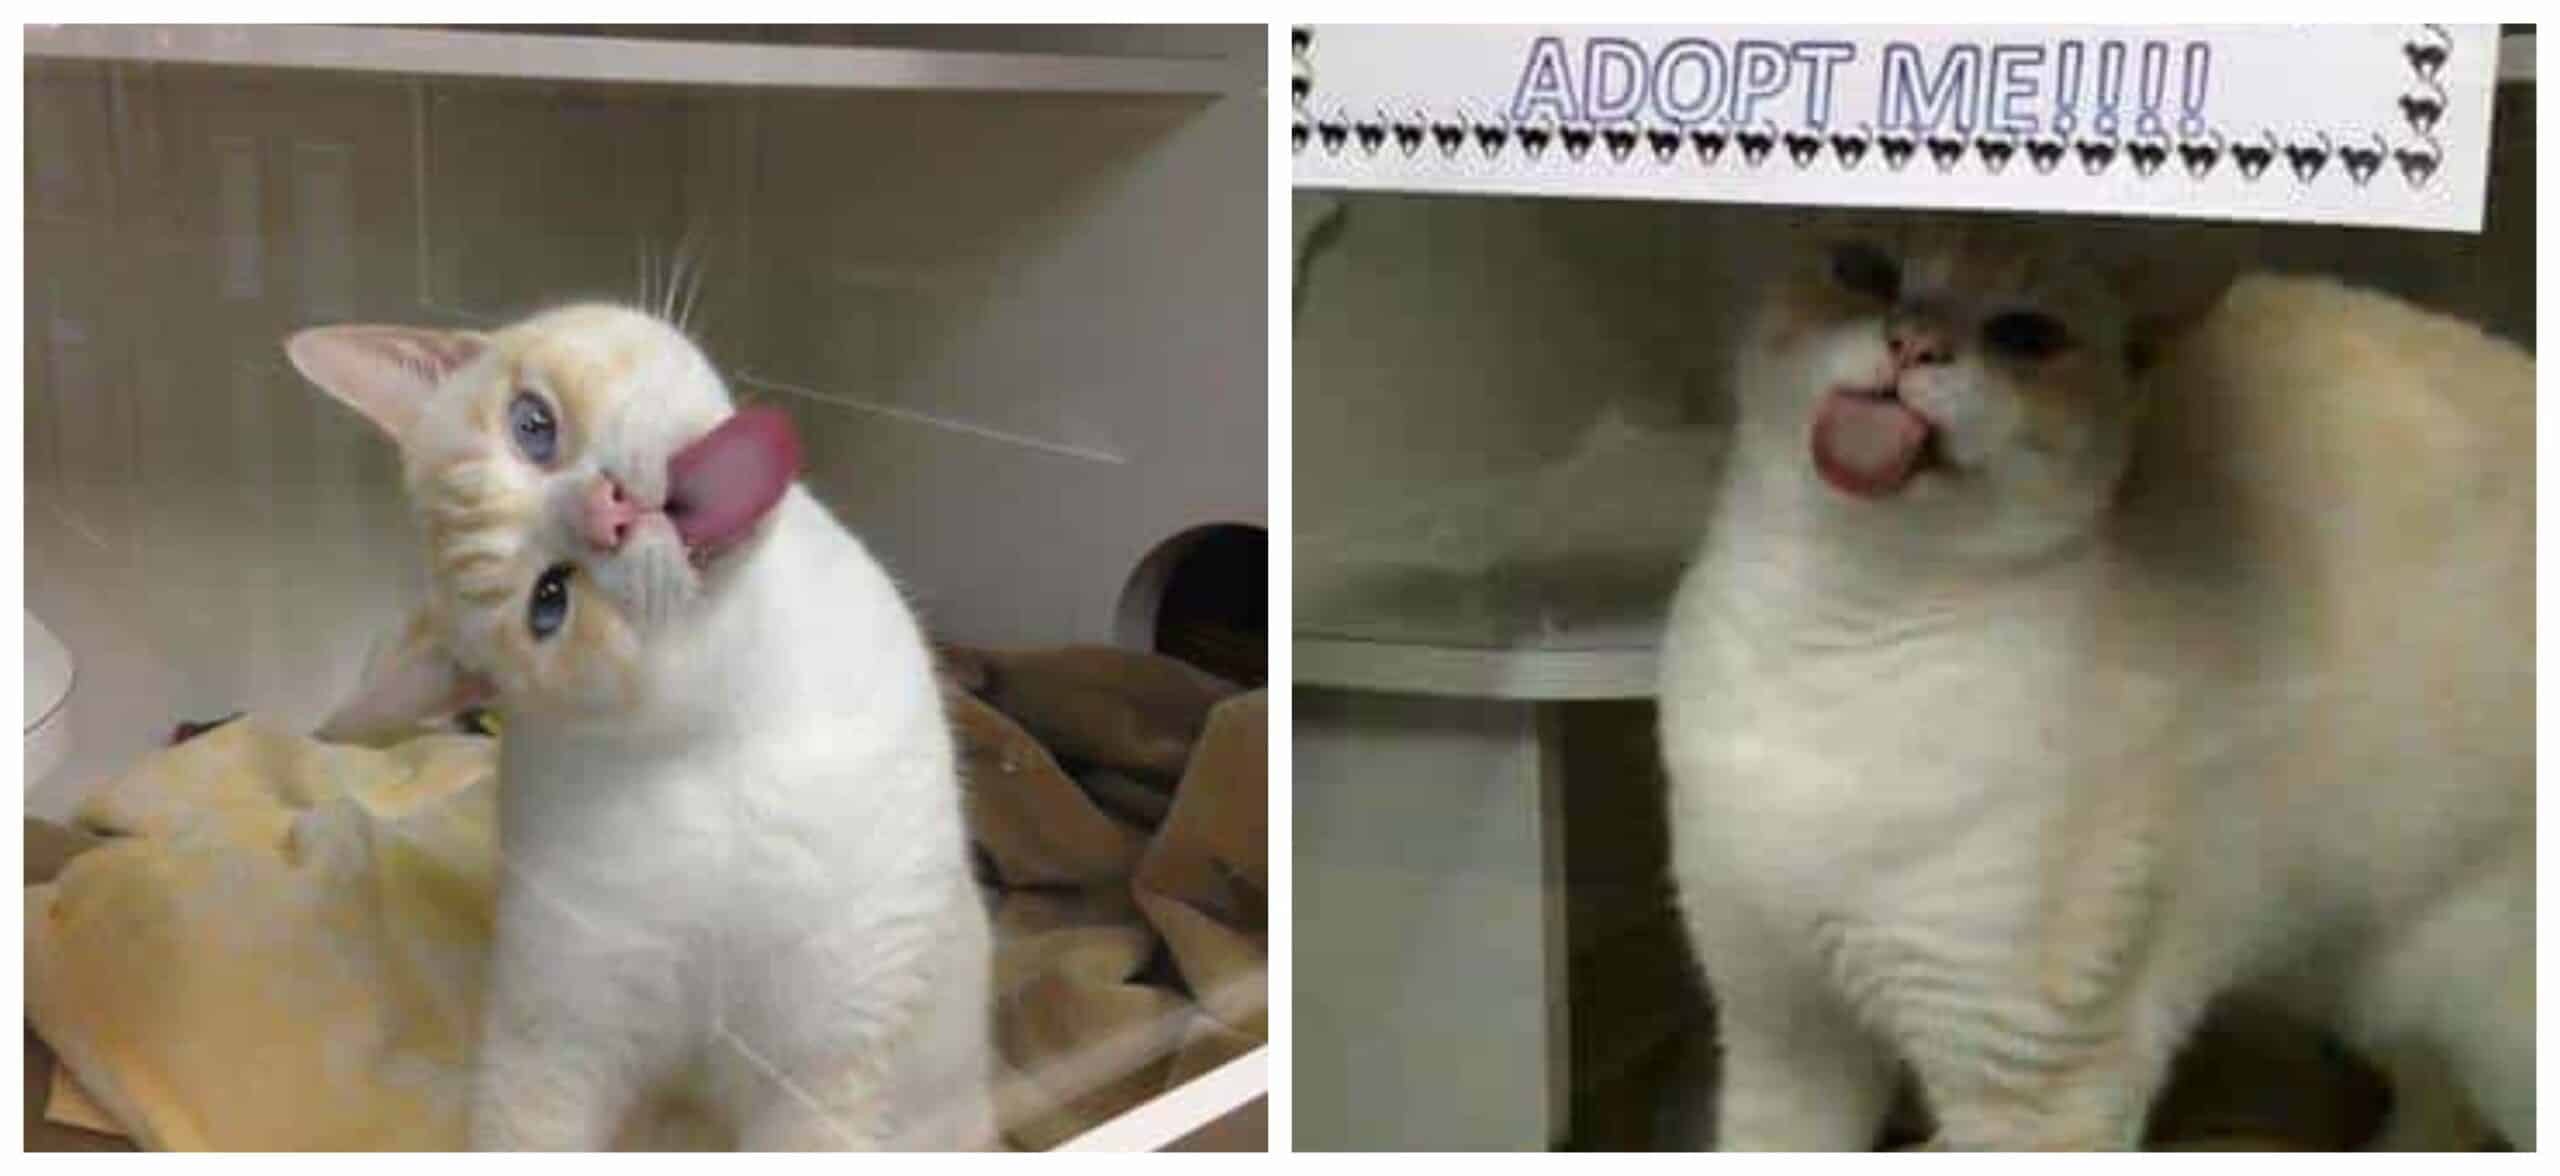 A shelter cat licks a window to attract adopters and find a forever home